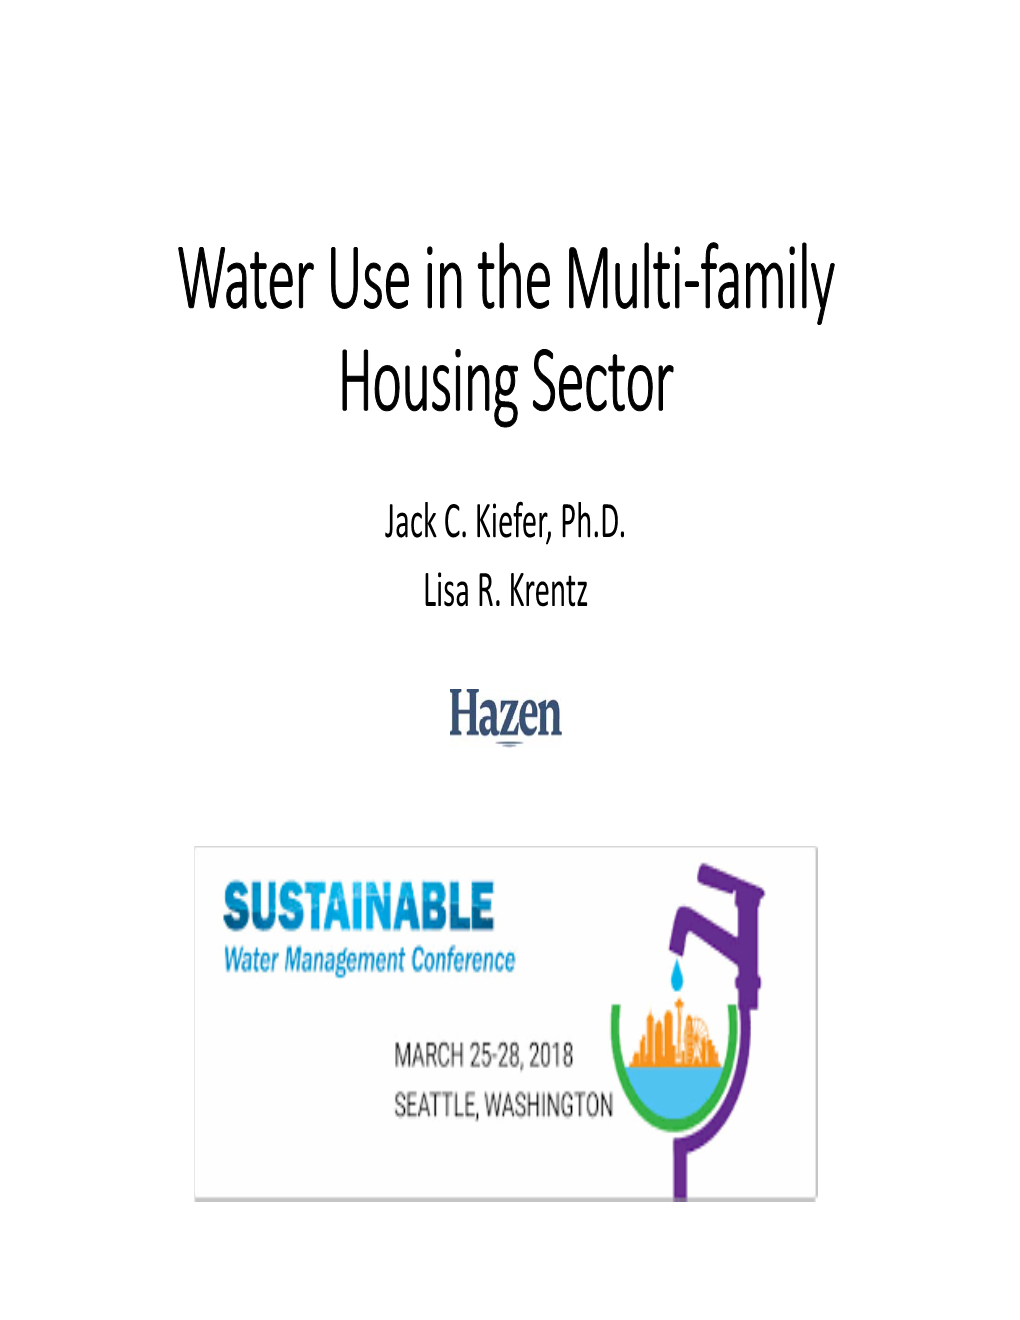 Water Use in the Multi-Family Housing Sector (Project #4554)